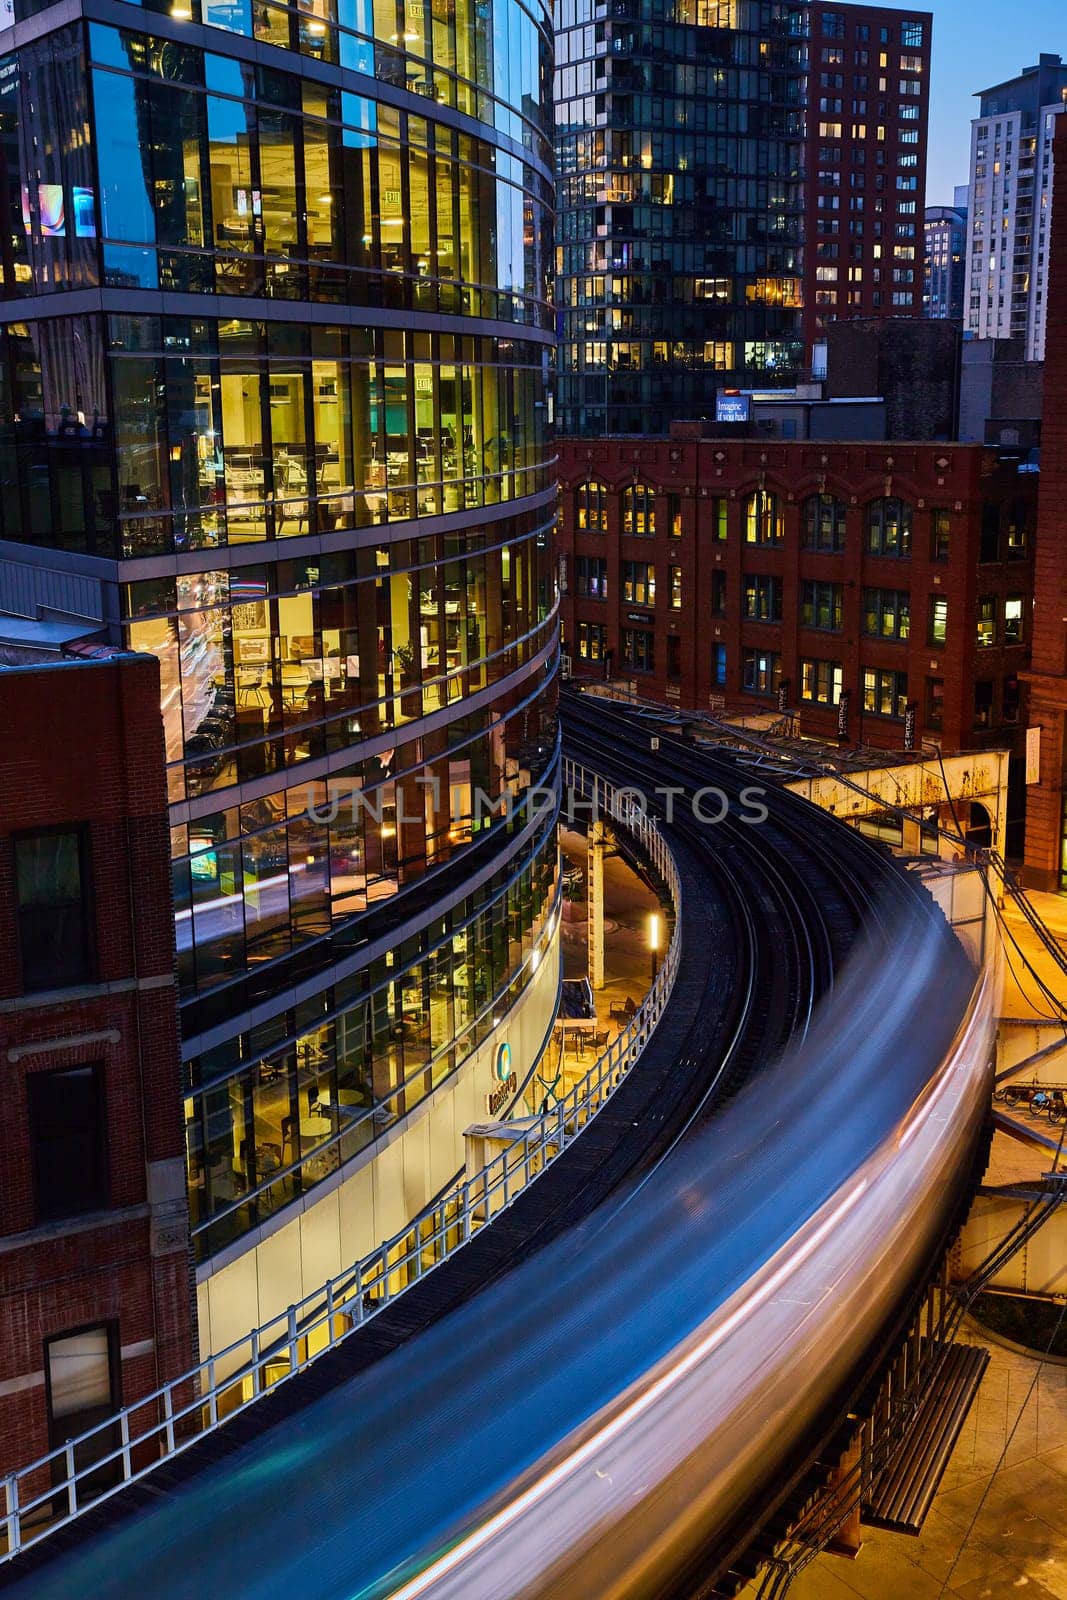 Twilight train in motion along the tracks, showcasing the blend of historical and modern architecture in 2023 Chicago, Illinois